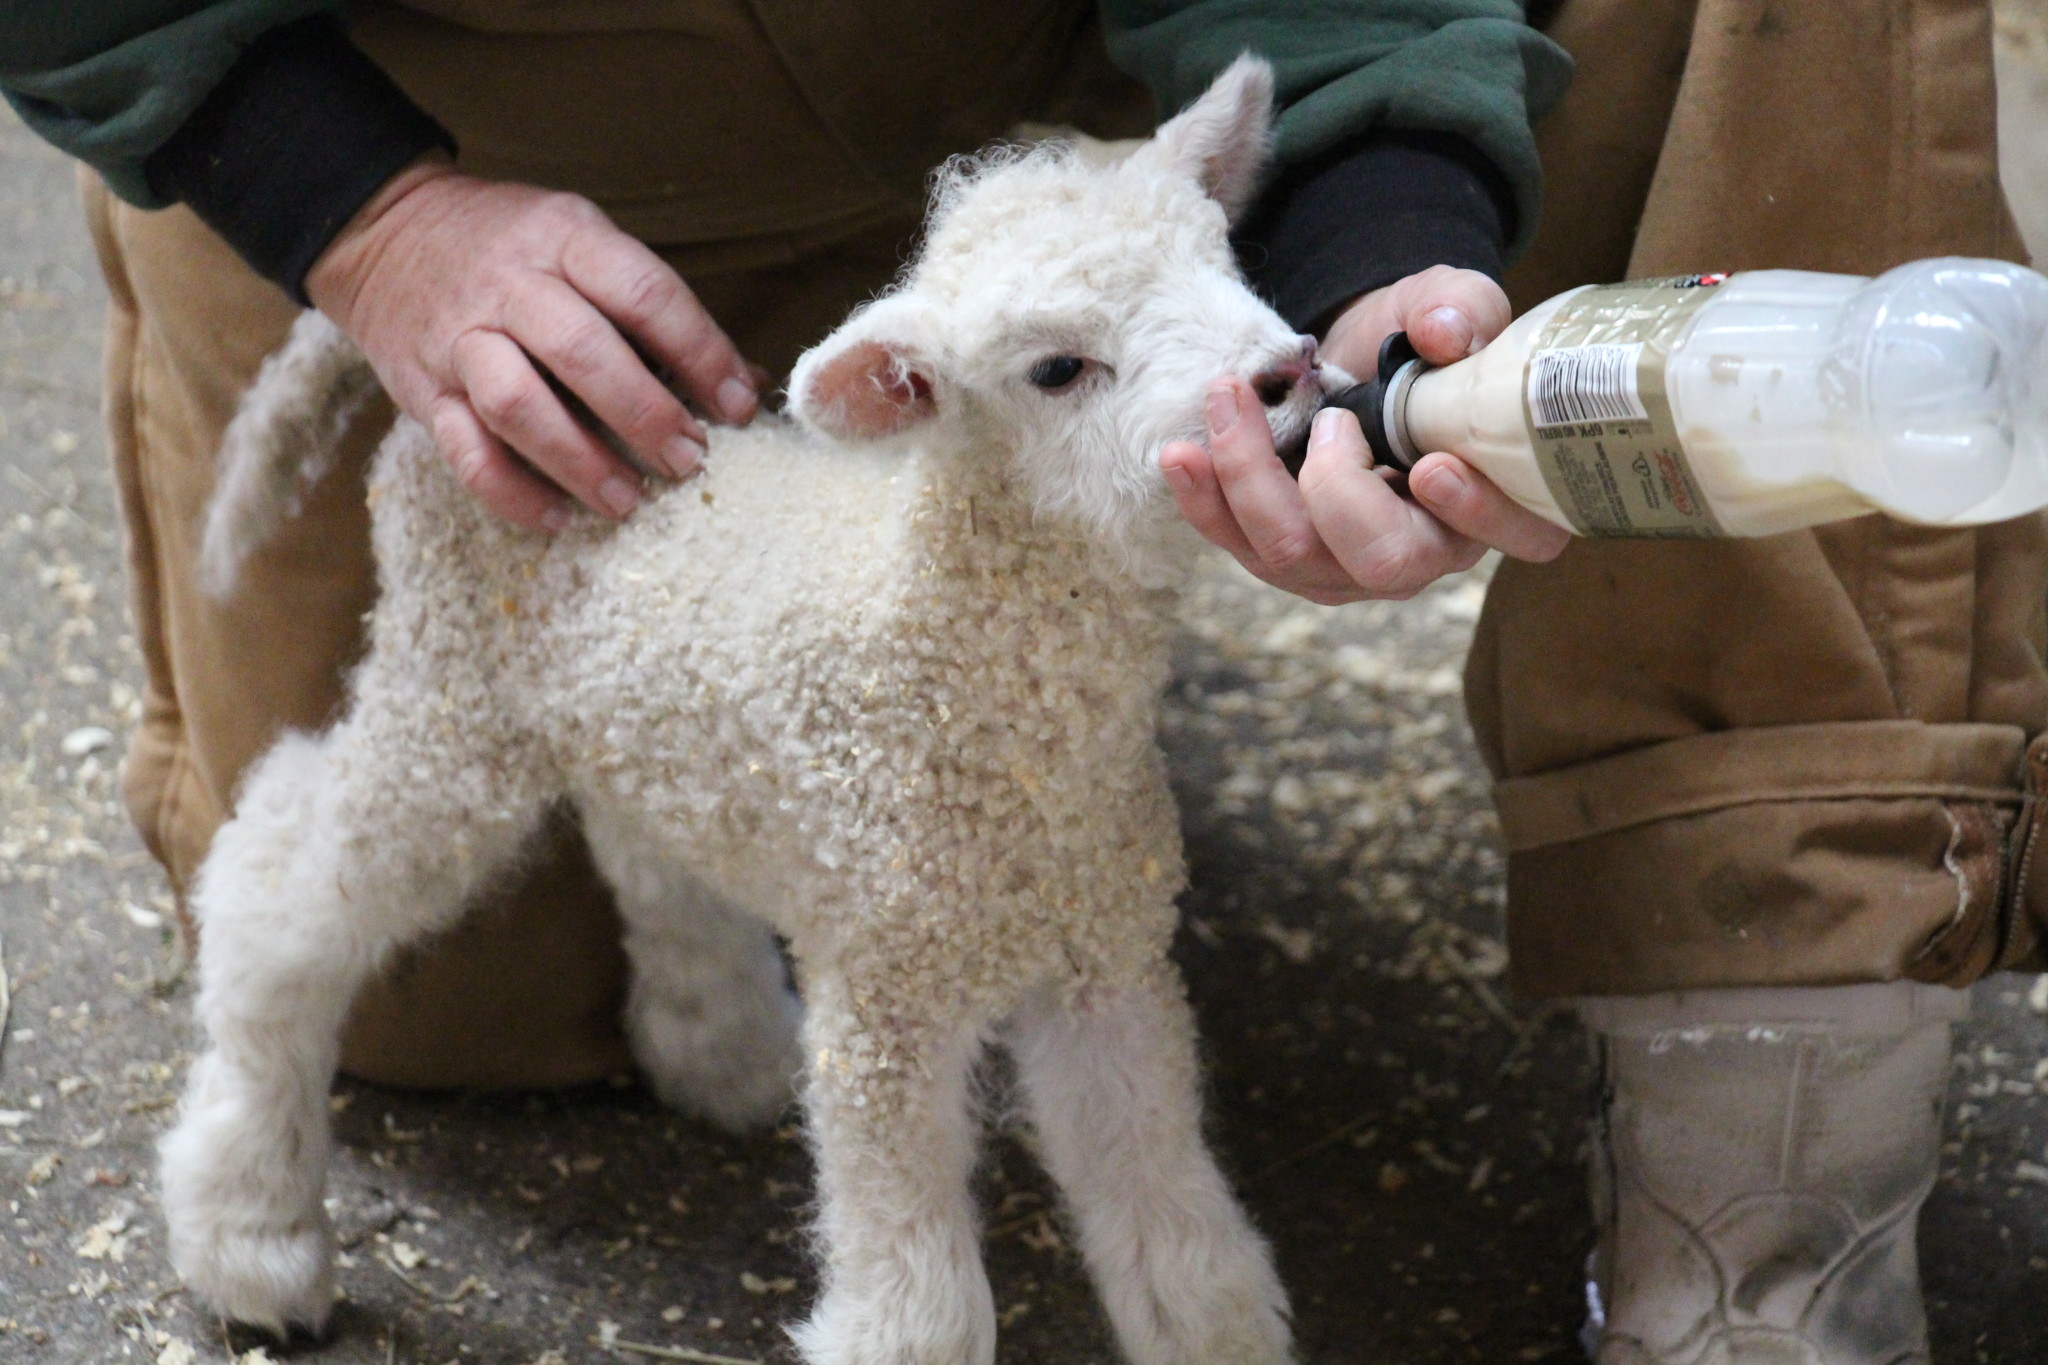 “Using the new Twitter app Periscope, we were able to live stream our triplets being bottle-fed by our Weavers and stable staff in the Blue Bell Pasture,” Ross said in an email. COURTESY PHOTO / MAKING HISTORY BLOG TEAM